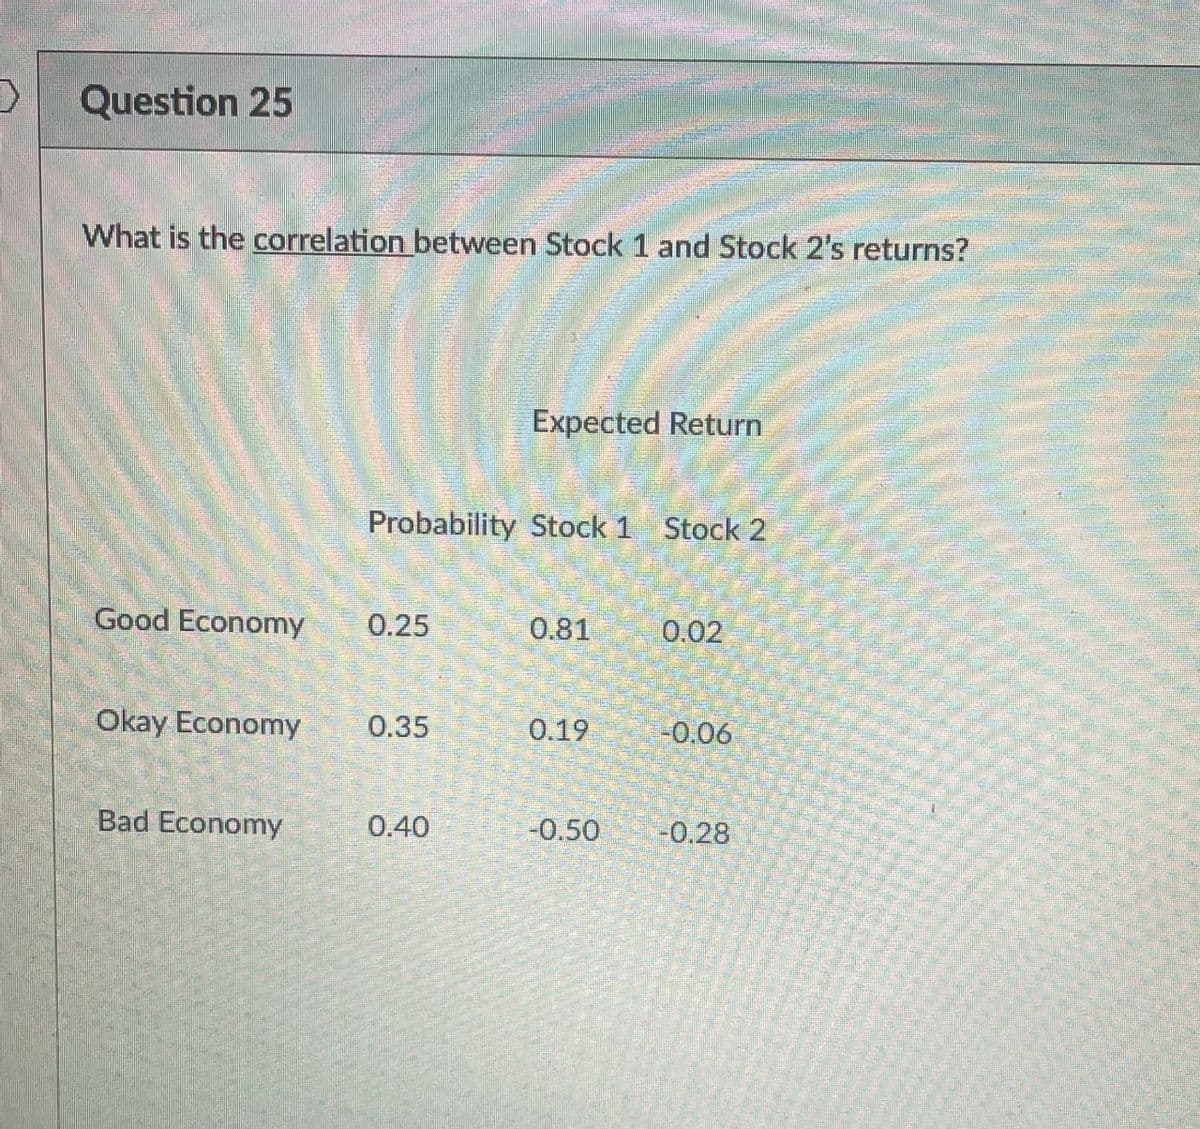 Question 25
What is the correlation between Stock 1 and Stock 2's returns?
Expected Return
Probability Stock 1 Stock 2
Good Economy
0.25
0.81
0.02
Okay Economy
0.35
0.19
-0.06
Bad Economy
0.40
-0.50
-0.28